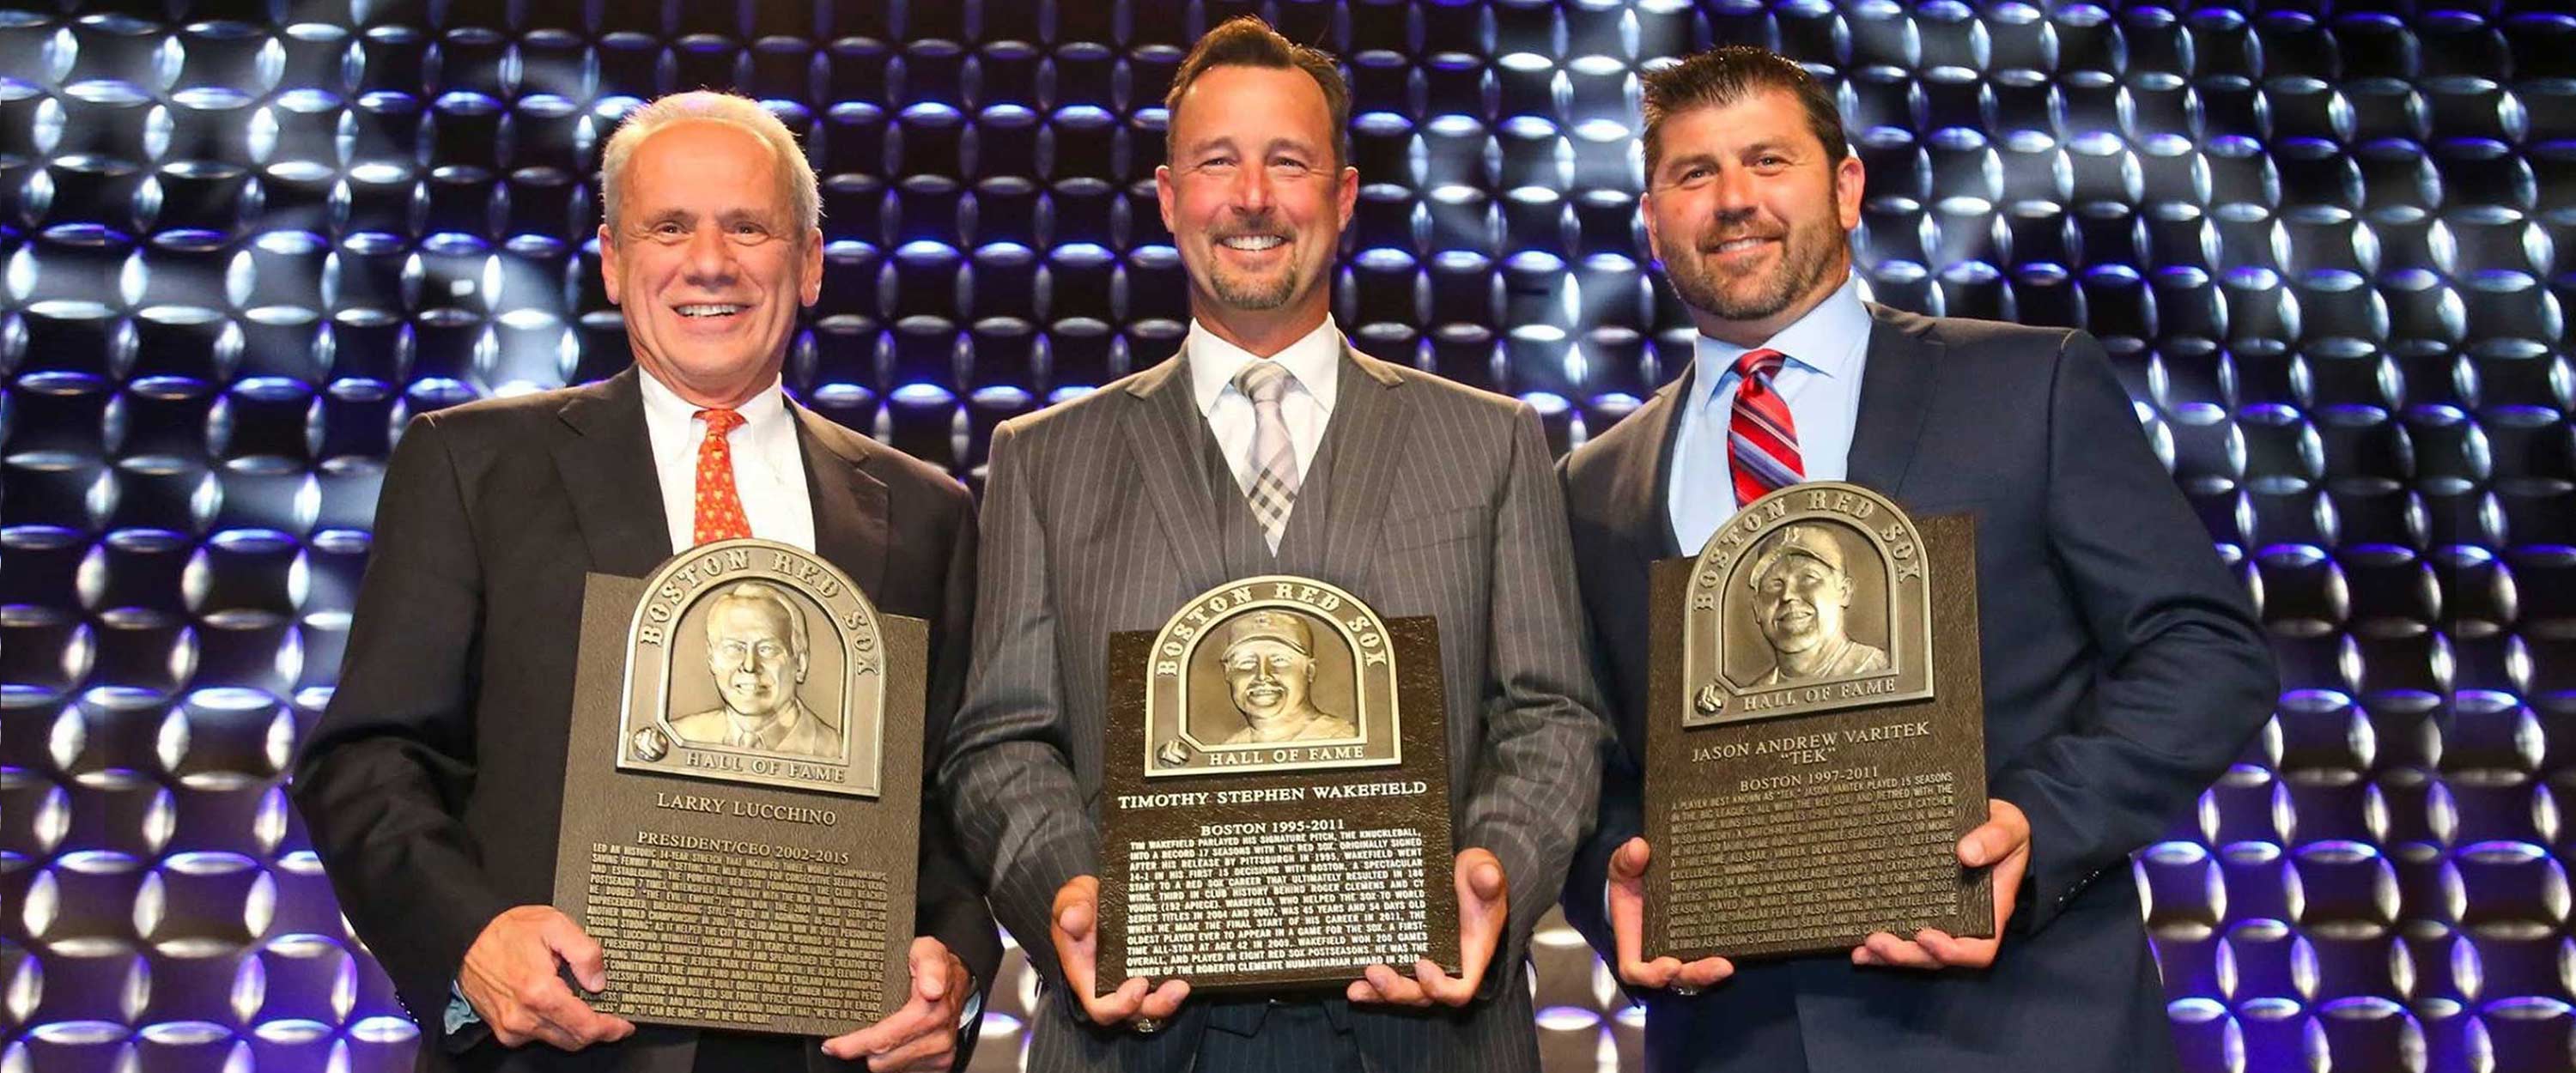 Photo from the event of Larry Lucchino, Tim Wakefield, and Jason Varitek holding their Hall of Fame plaques and smiling